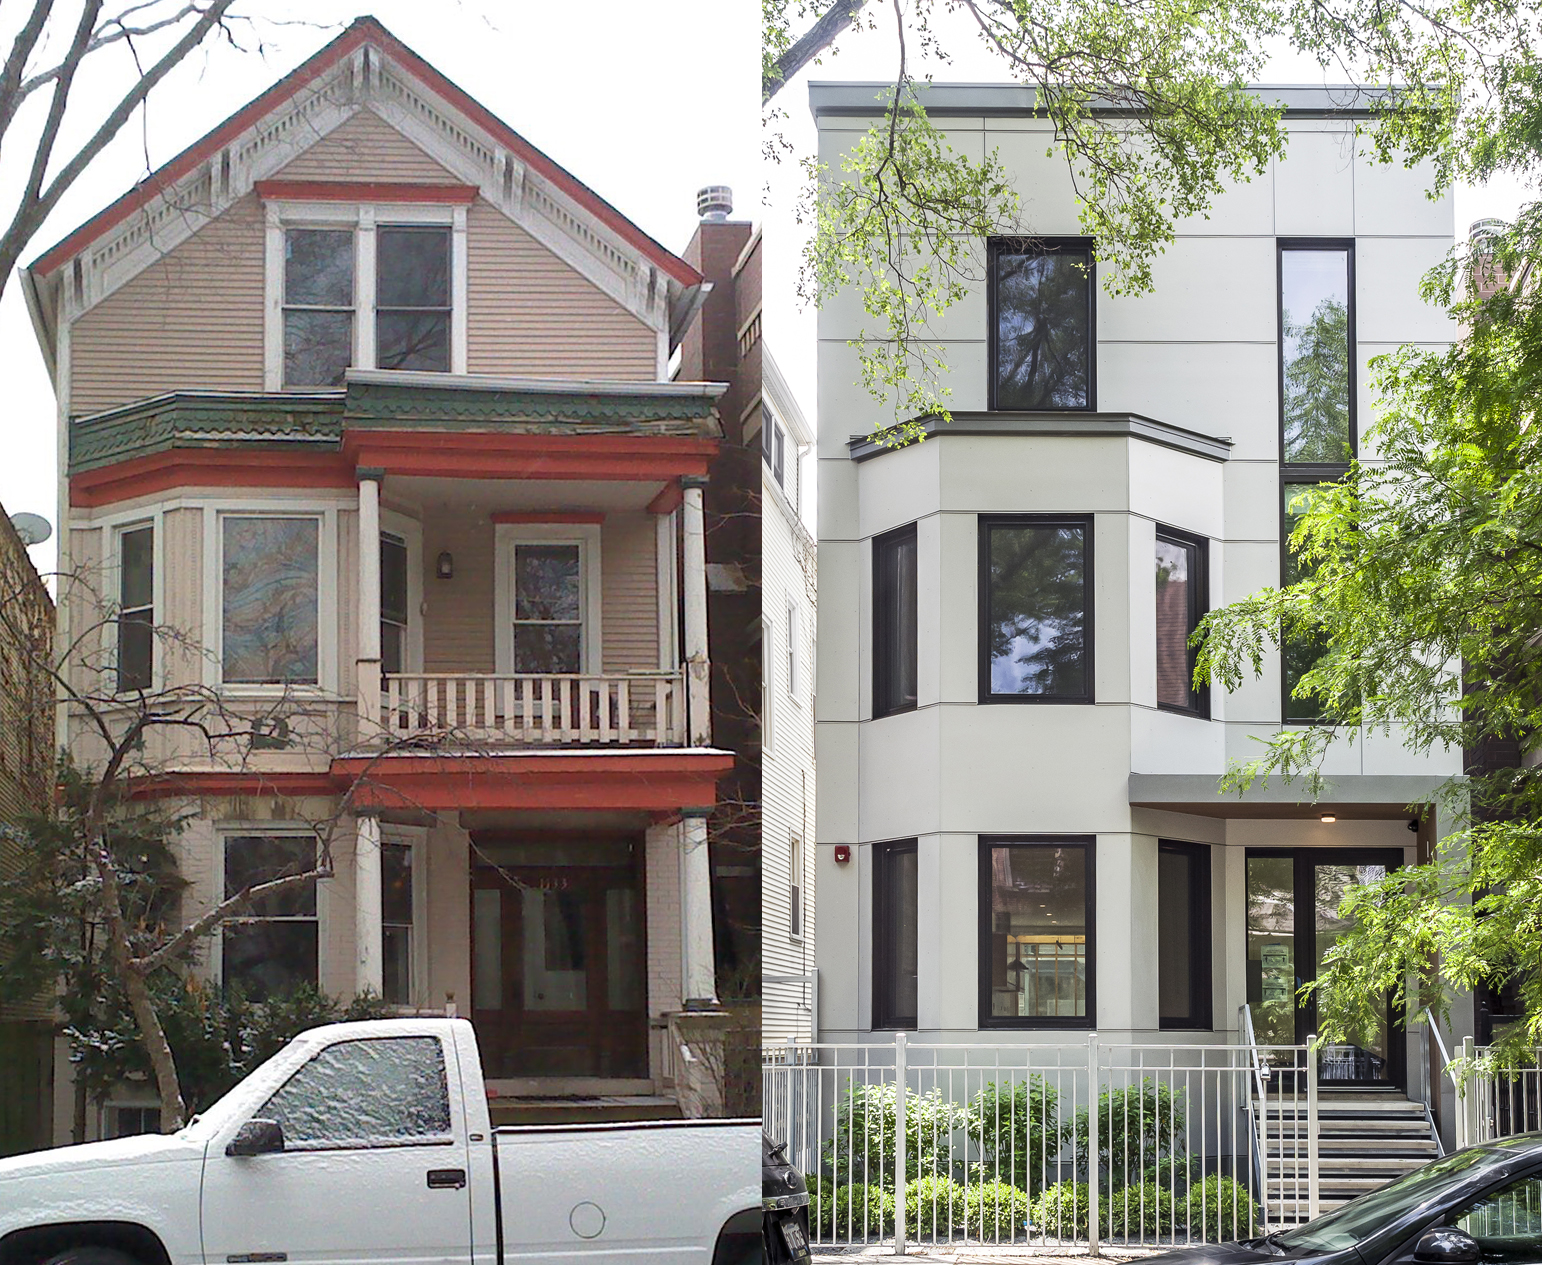 Before and after of the Ames Residence in Chicago, Illinois. Images courtesy of Phius